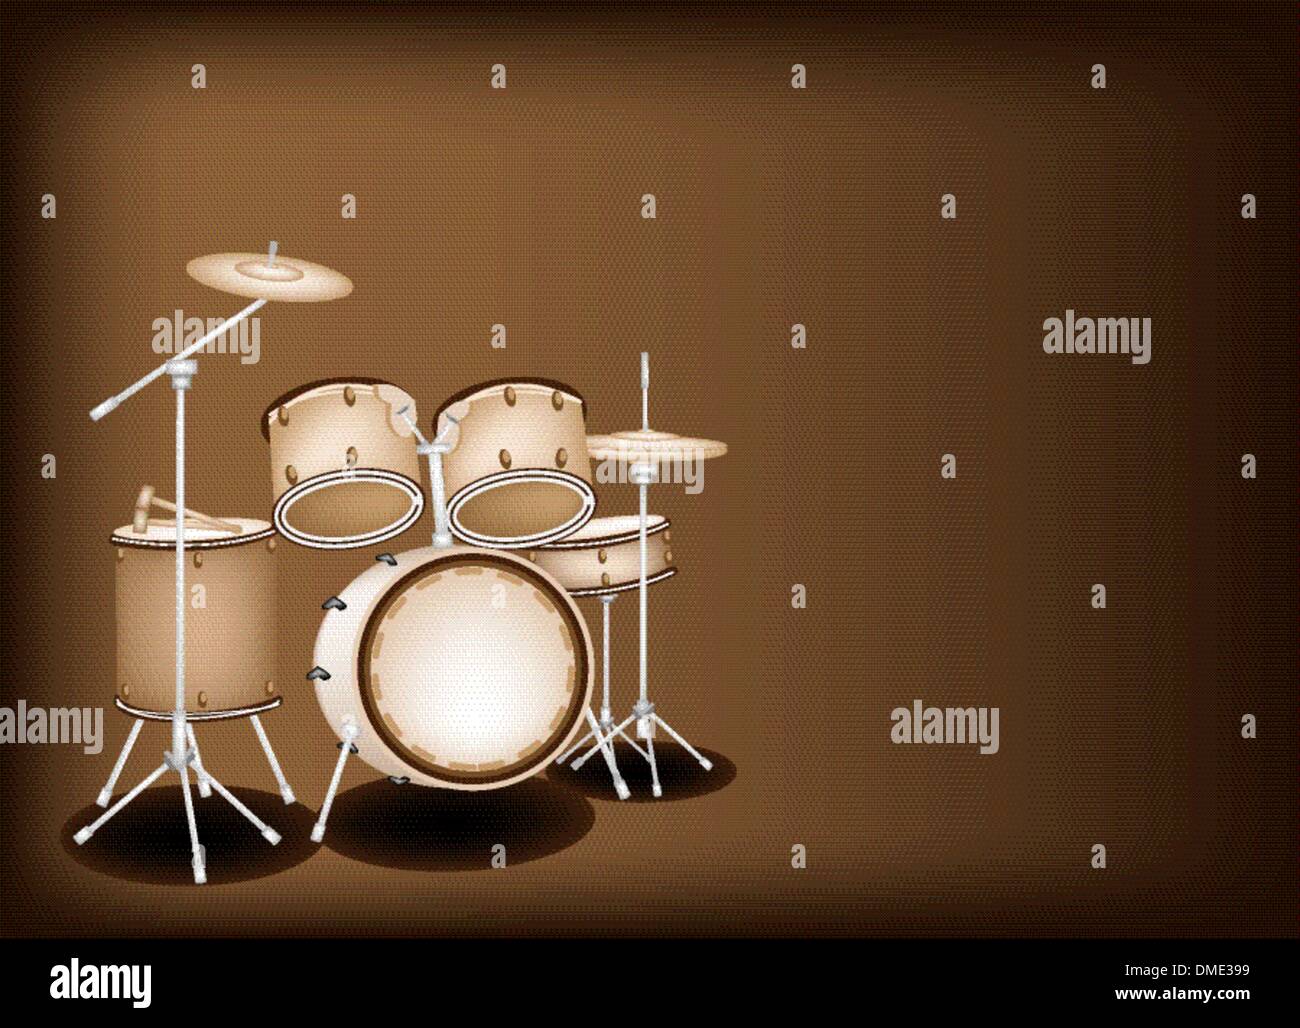 A Beautiful Drum Kit on Dark Brown Background Stock Vector